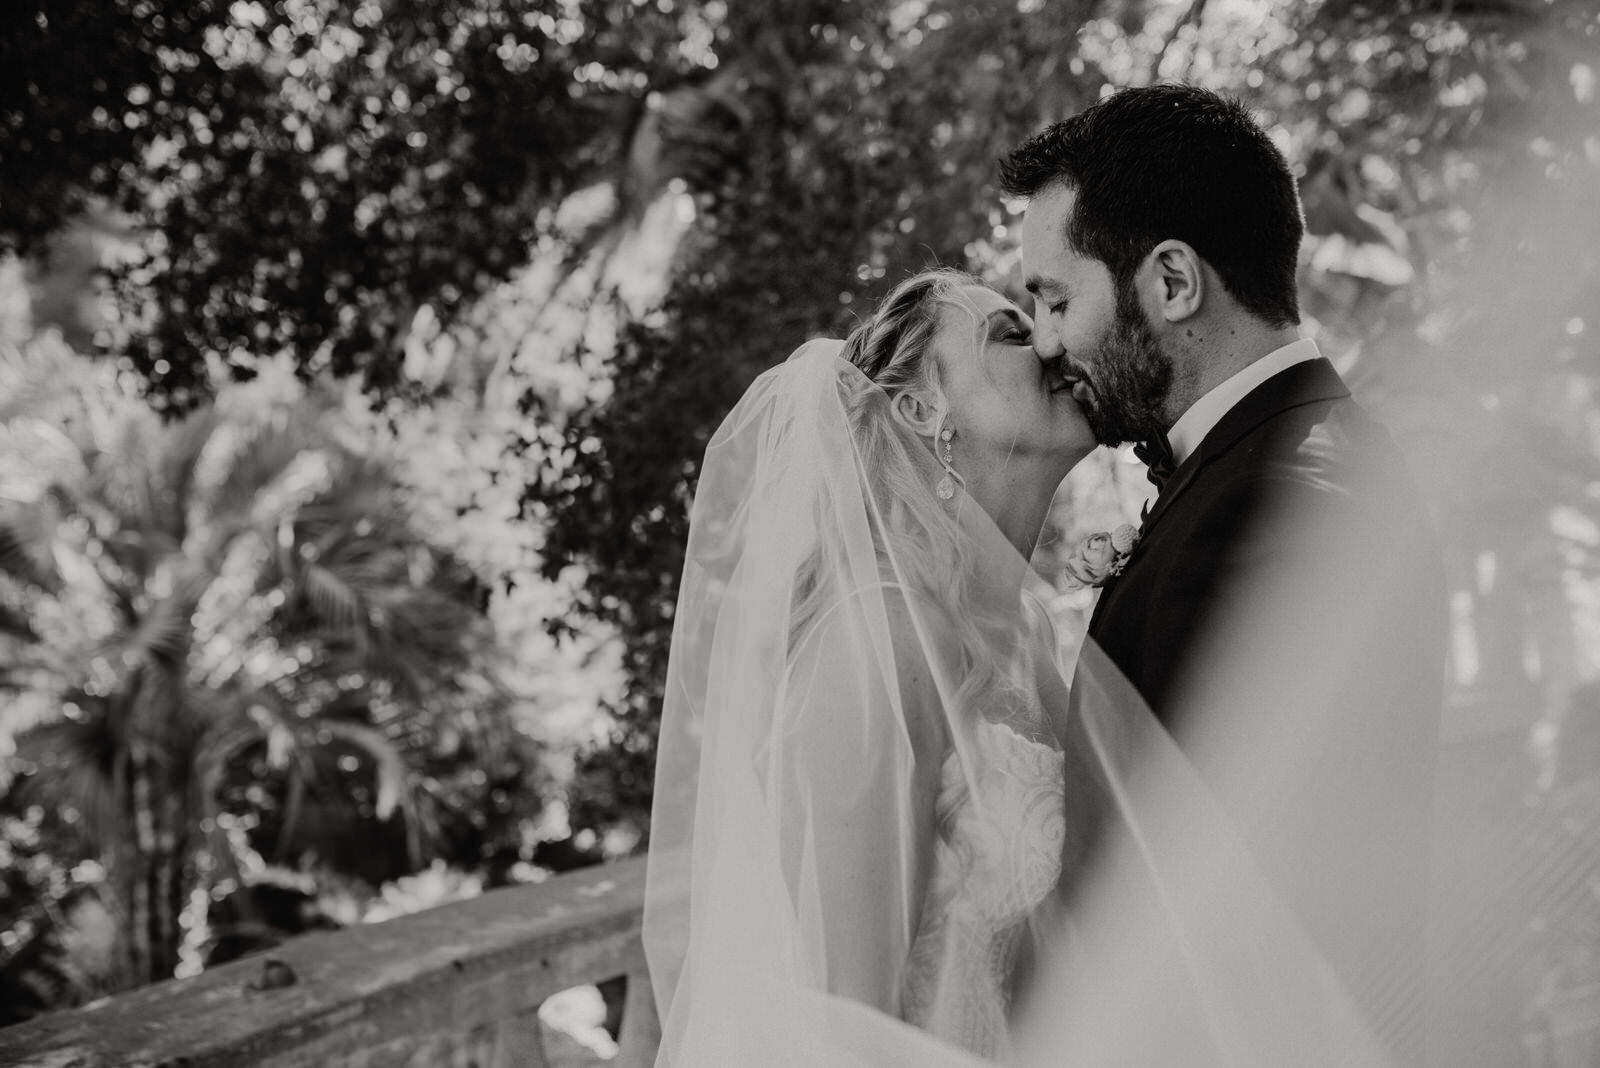 Bride in Hayley Paige wedding dress and veil kissing groom at Houdini Estate